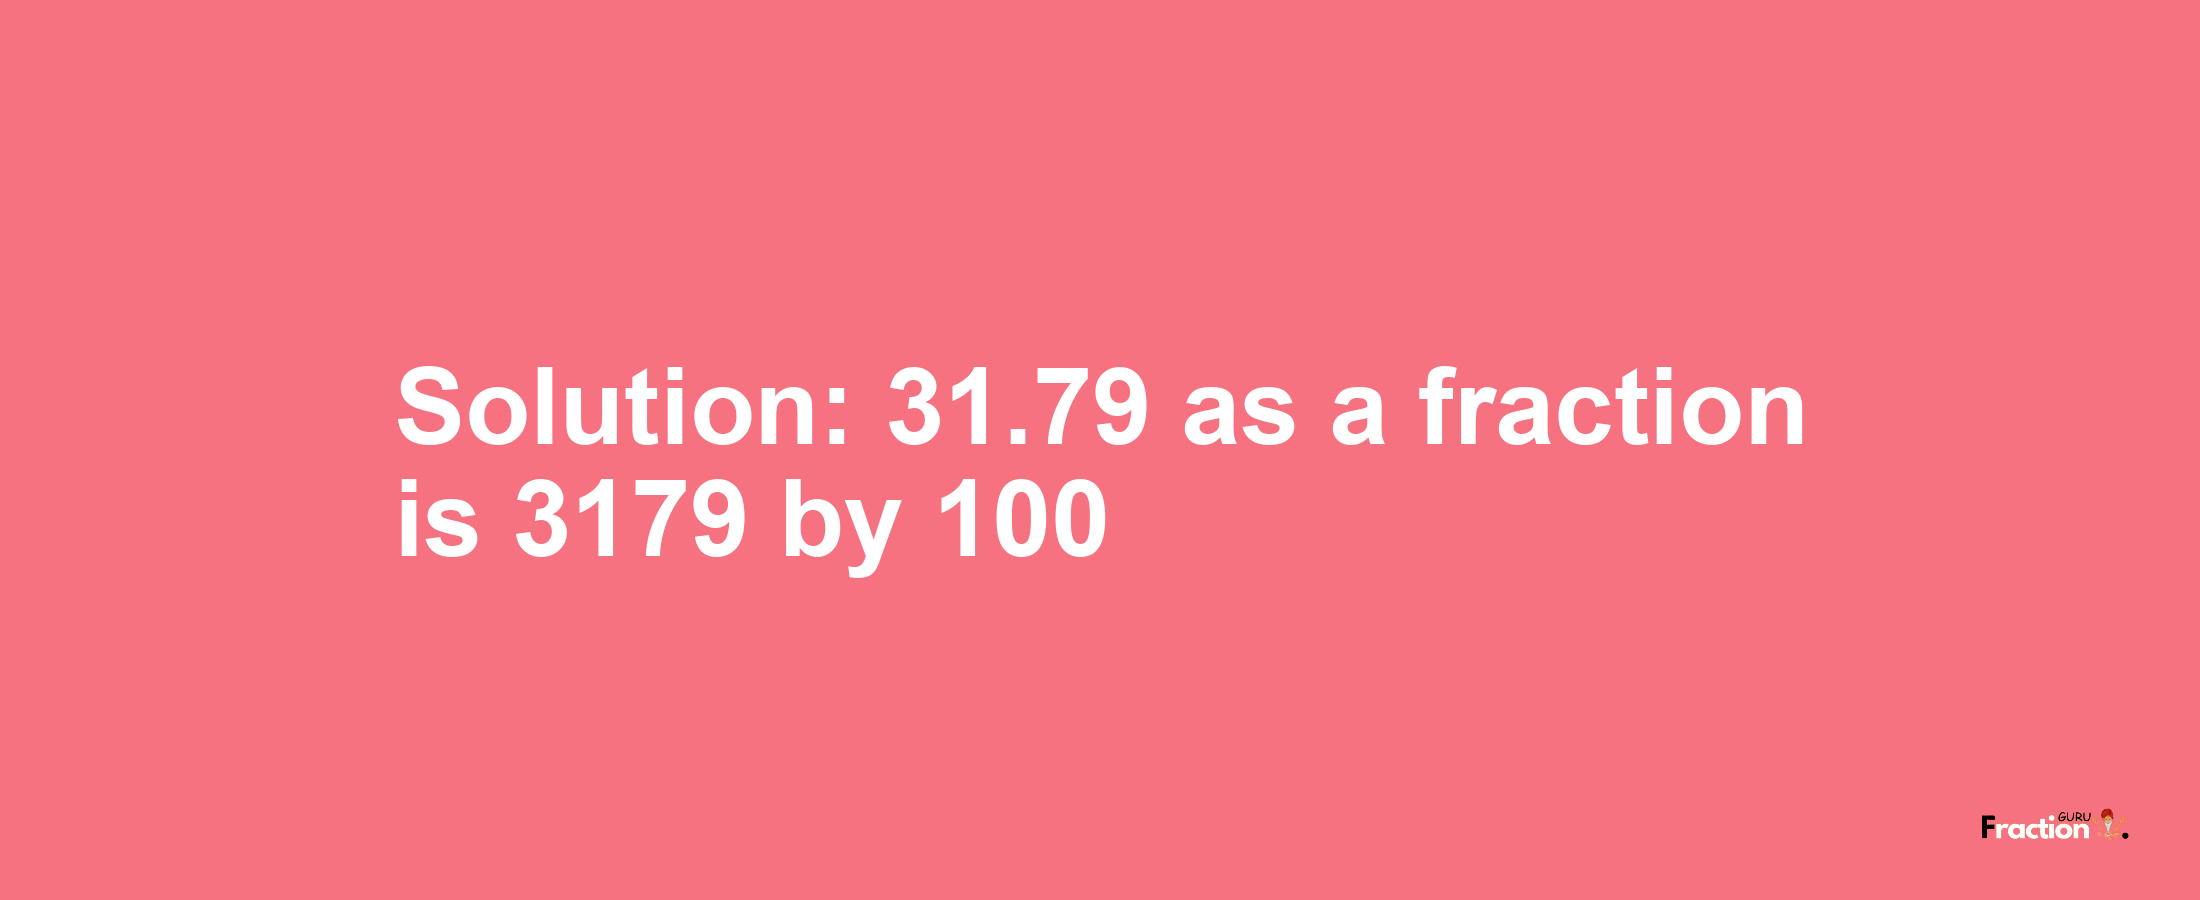 Solution:31.79 as a fraction is 3179/100